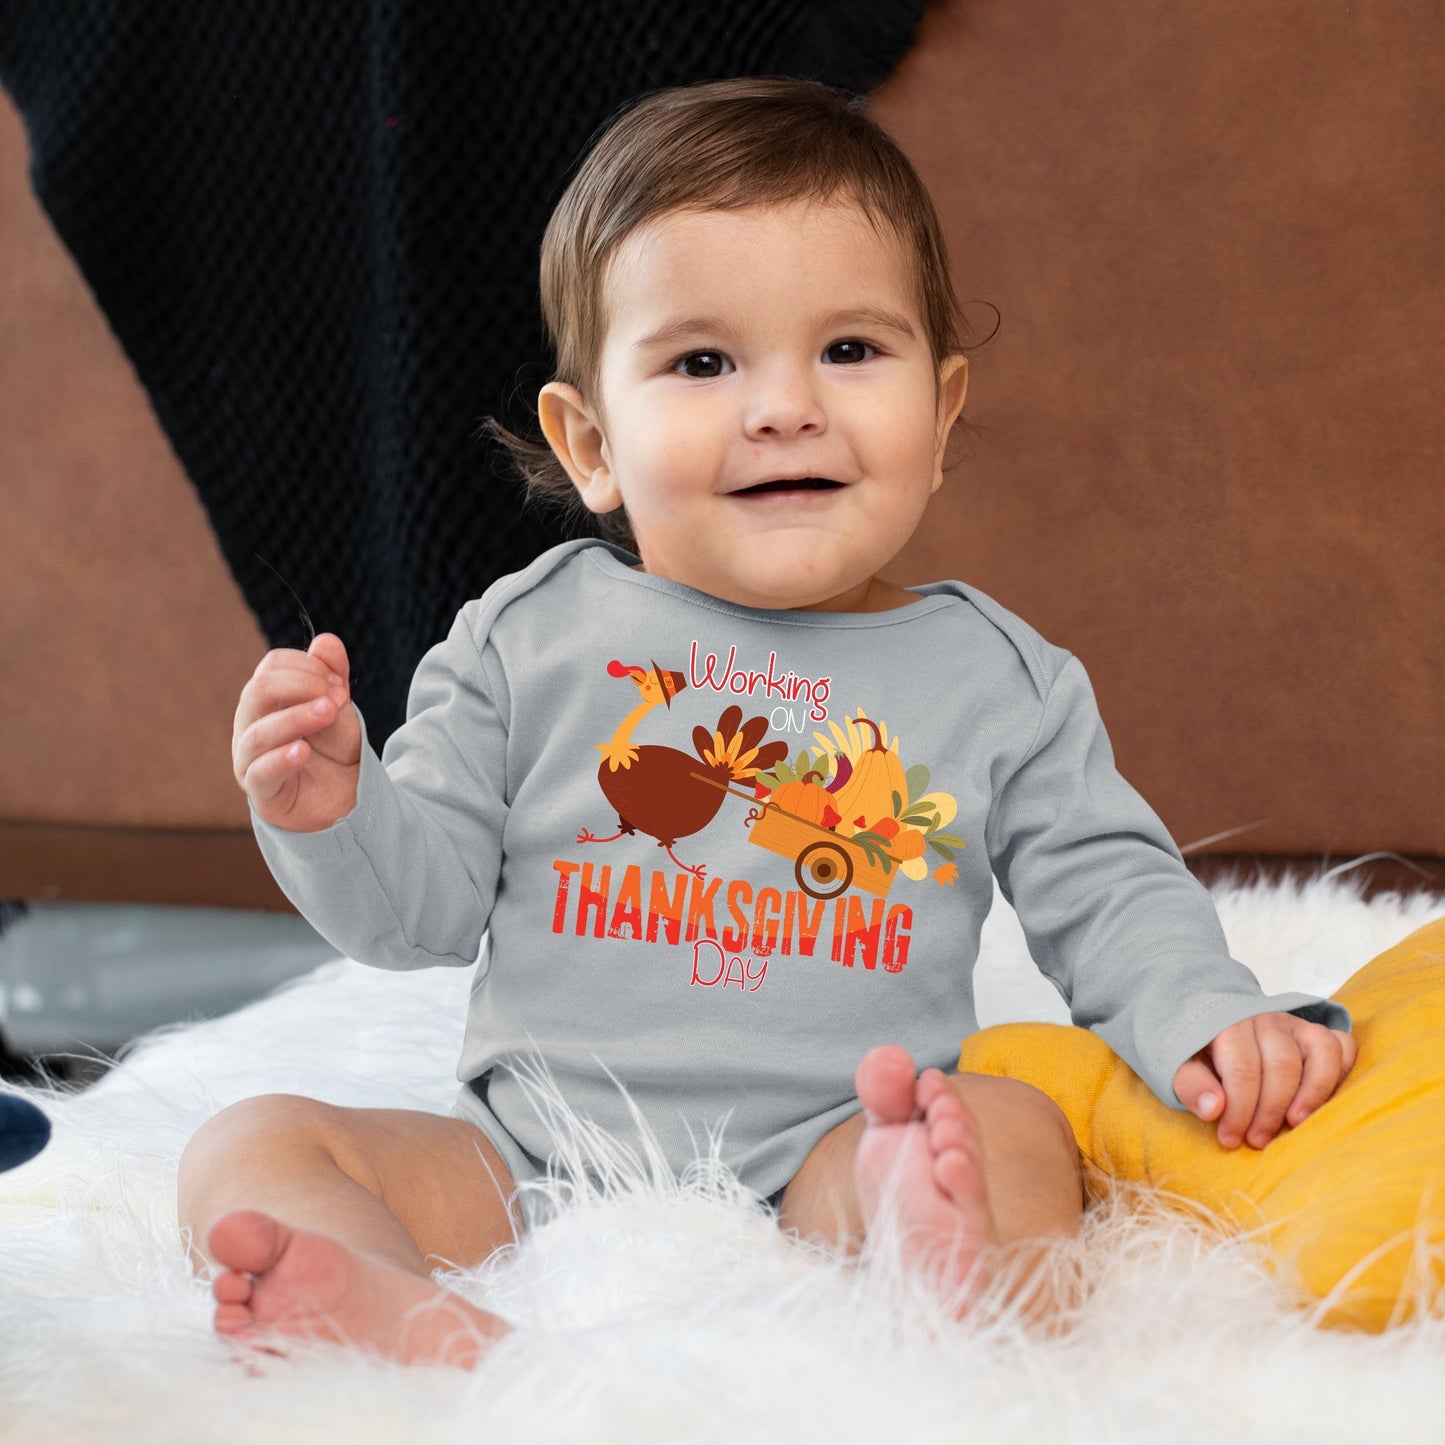 Working on Thanksgiving Day Bodysuit, Thanksgiving Bodysuit, Thanksgiving Bodysuit for Kid, Thanksgiving Gift, Cute Thanksgiving